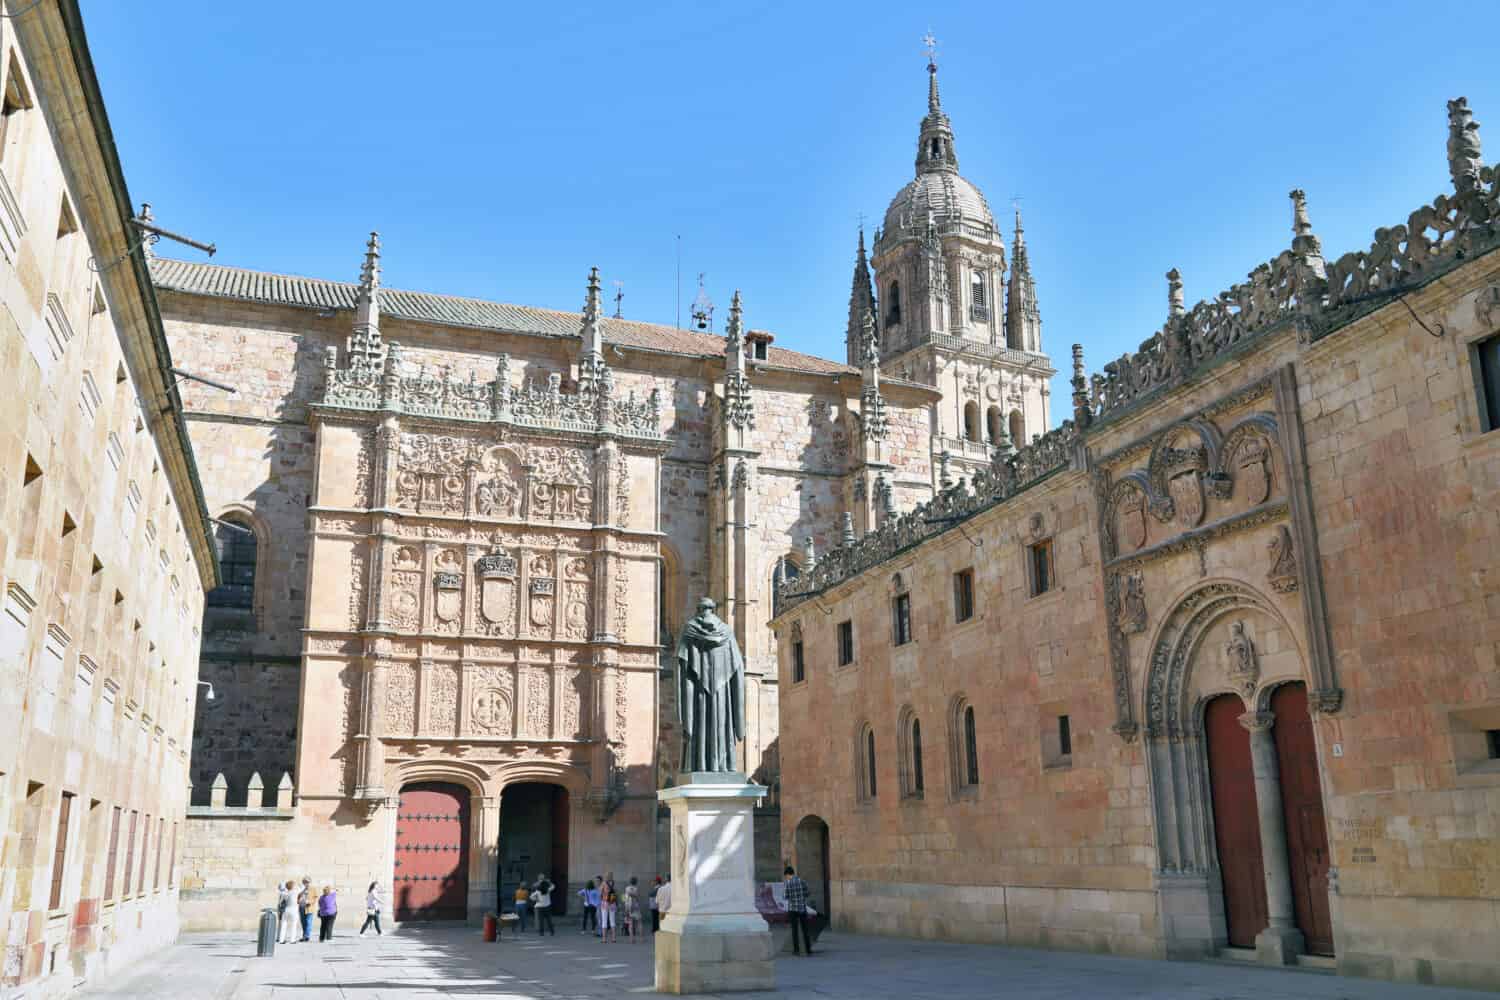 Beautiful view of famous University of Salamanca, the oldest university in Spain and one of the oldest in Europe, in Salamanca, Castilla y Leon region, Spain 